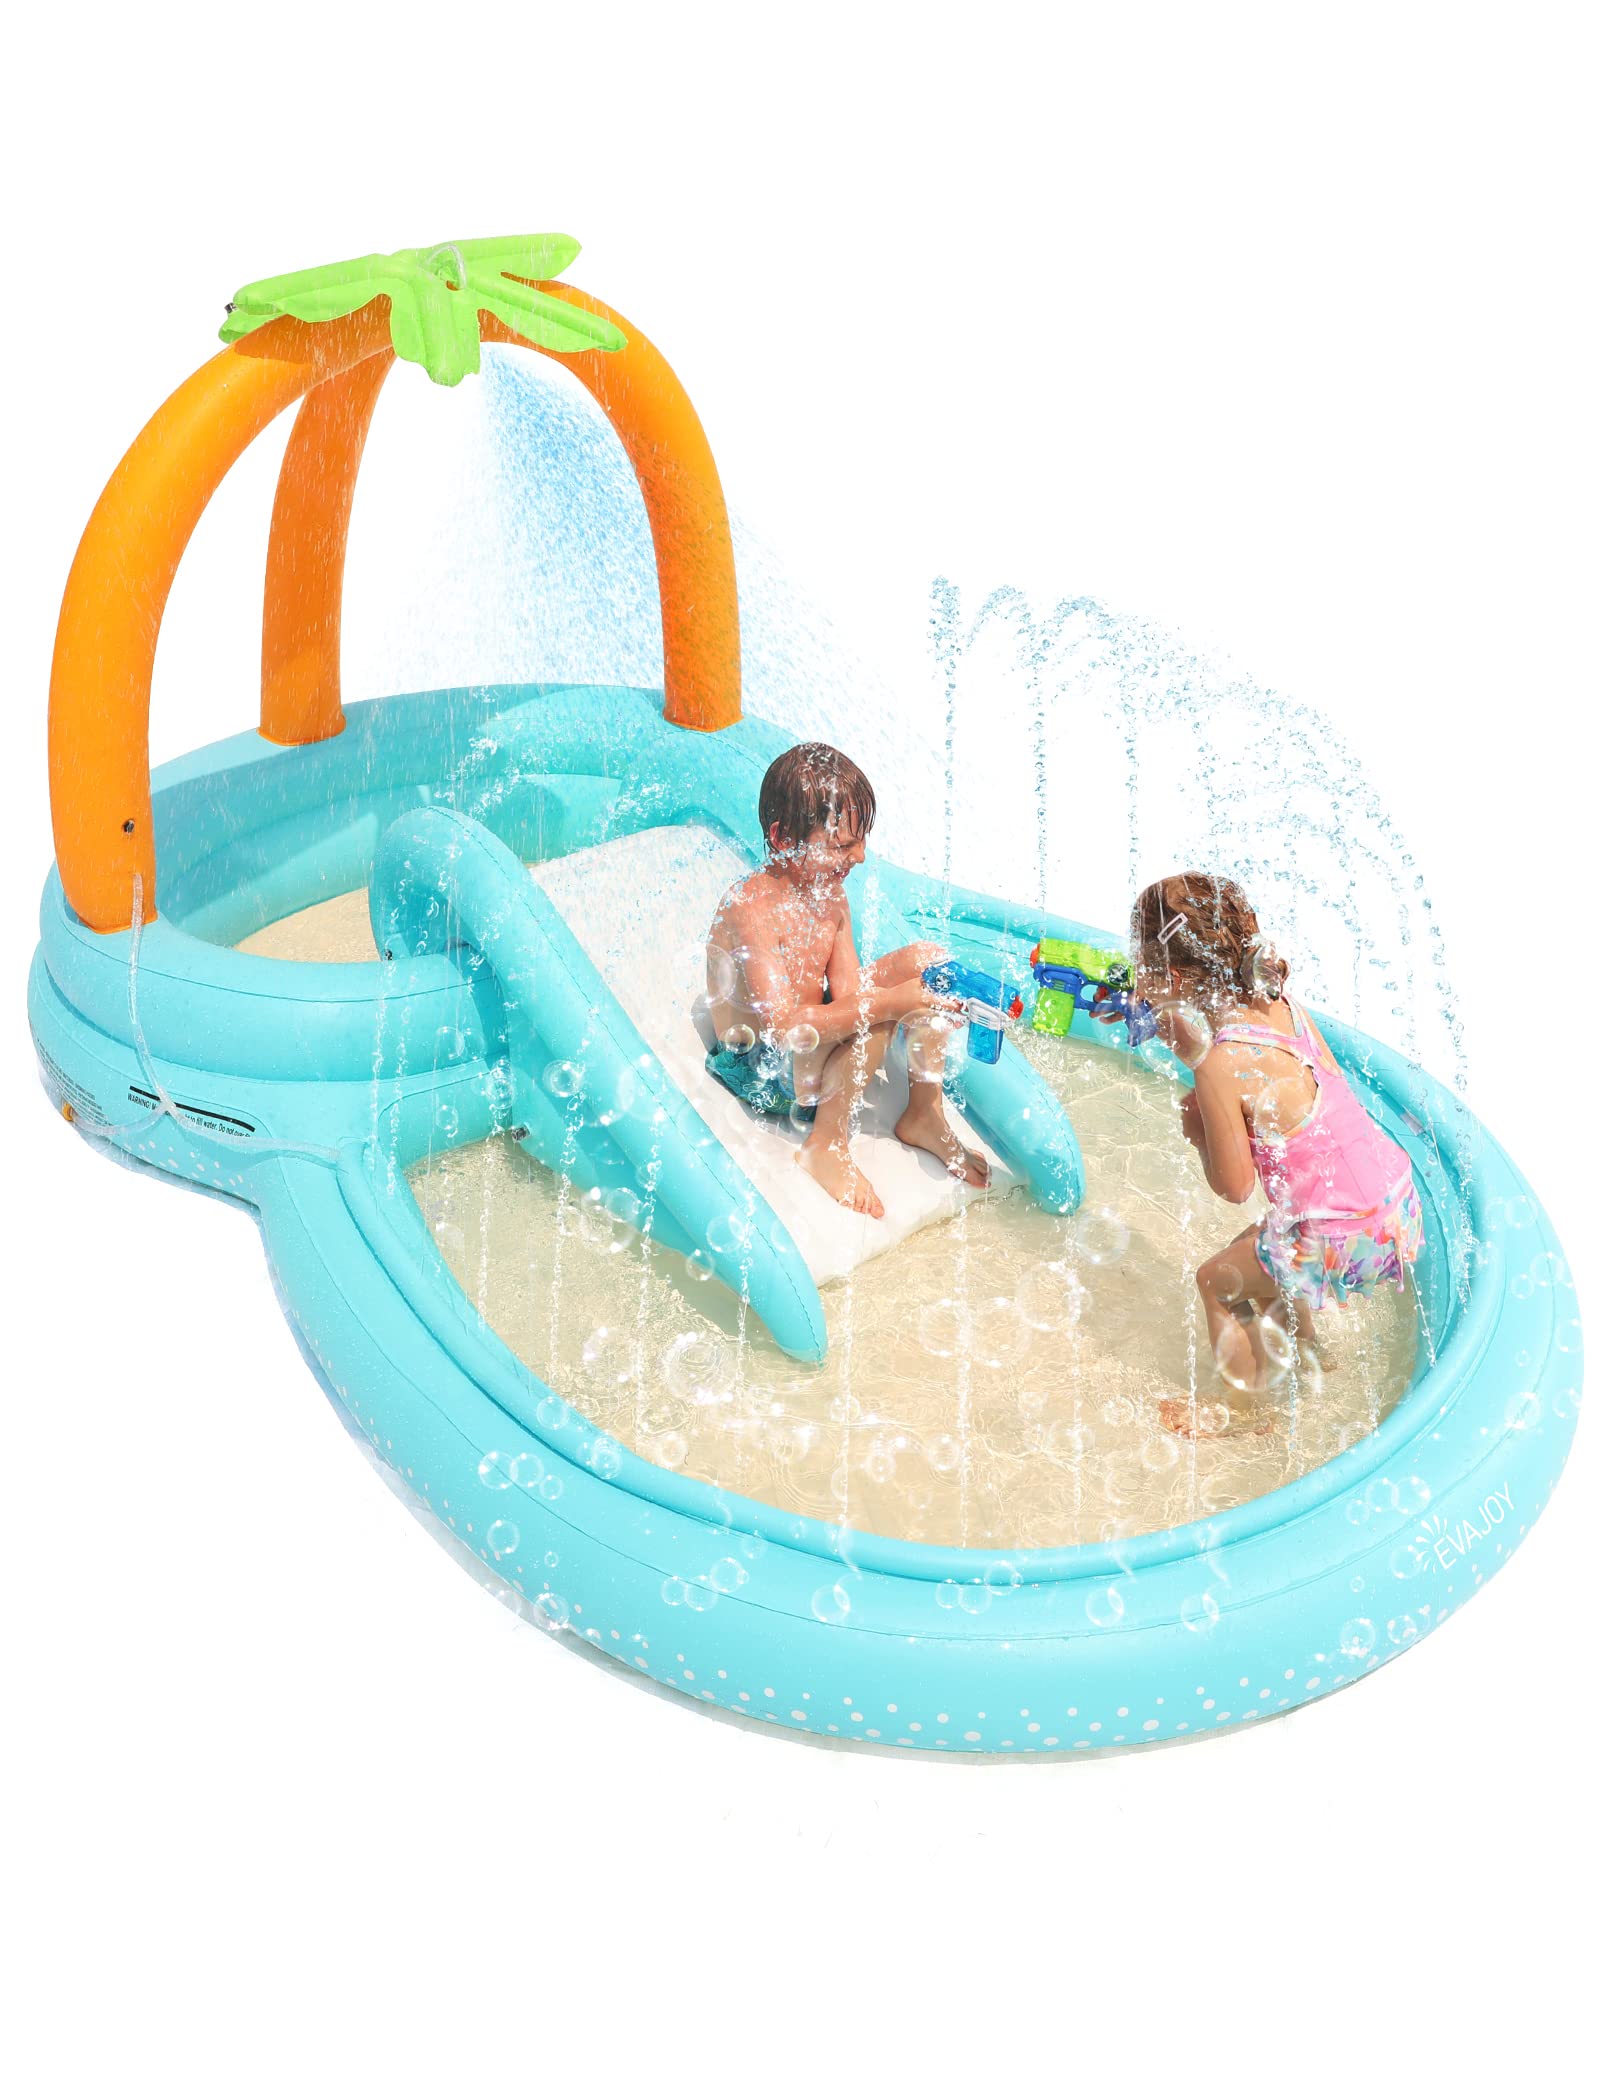 110" x 71" x 53" Evajoy Kid's Inflatable Indoor/ Outdoor Play Center Pool w/ Slide & Water Sprayers $51.05 + Free Shipping